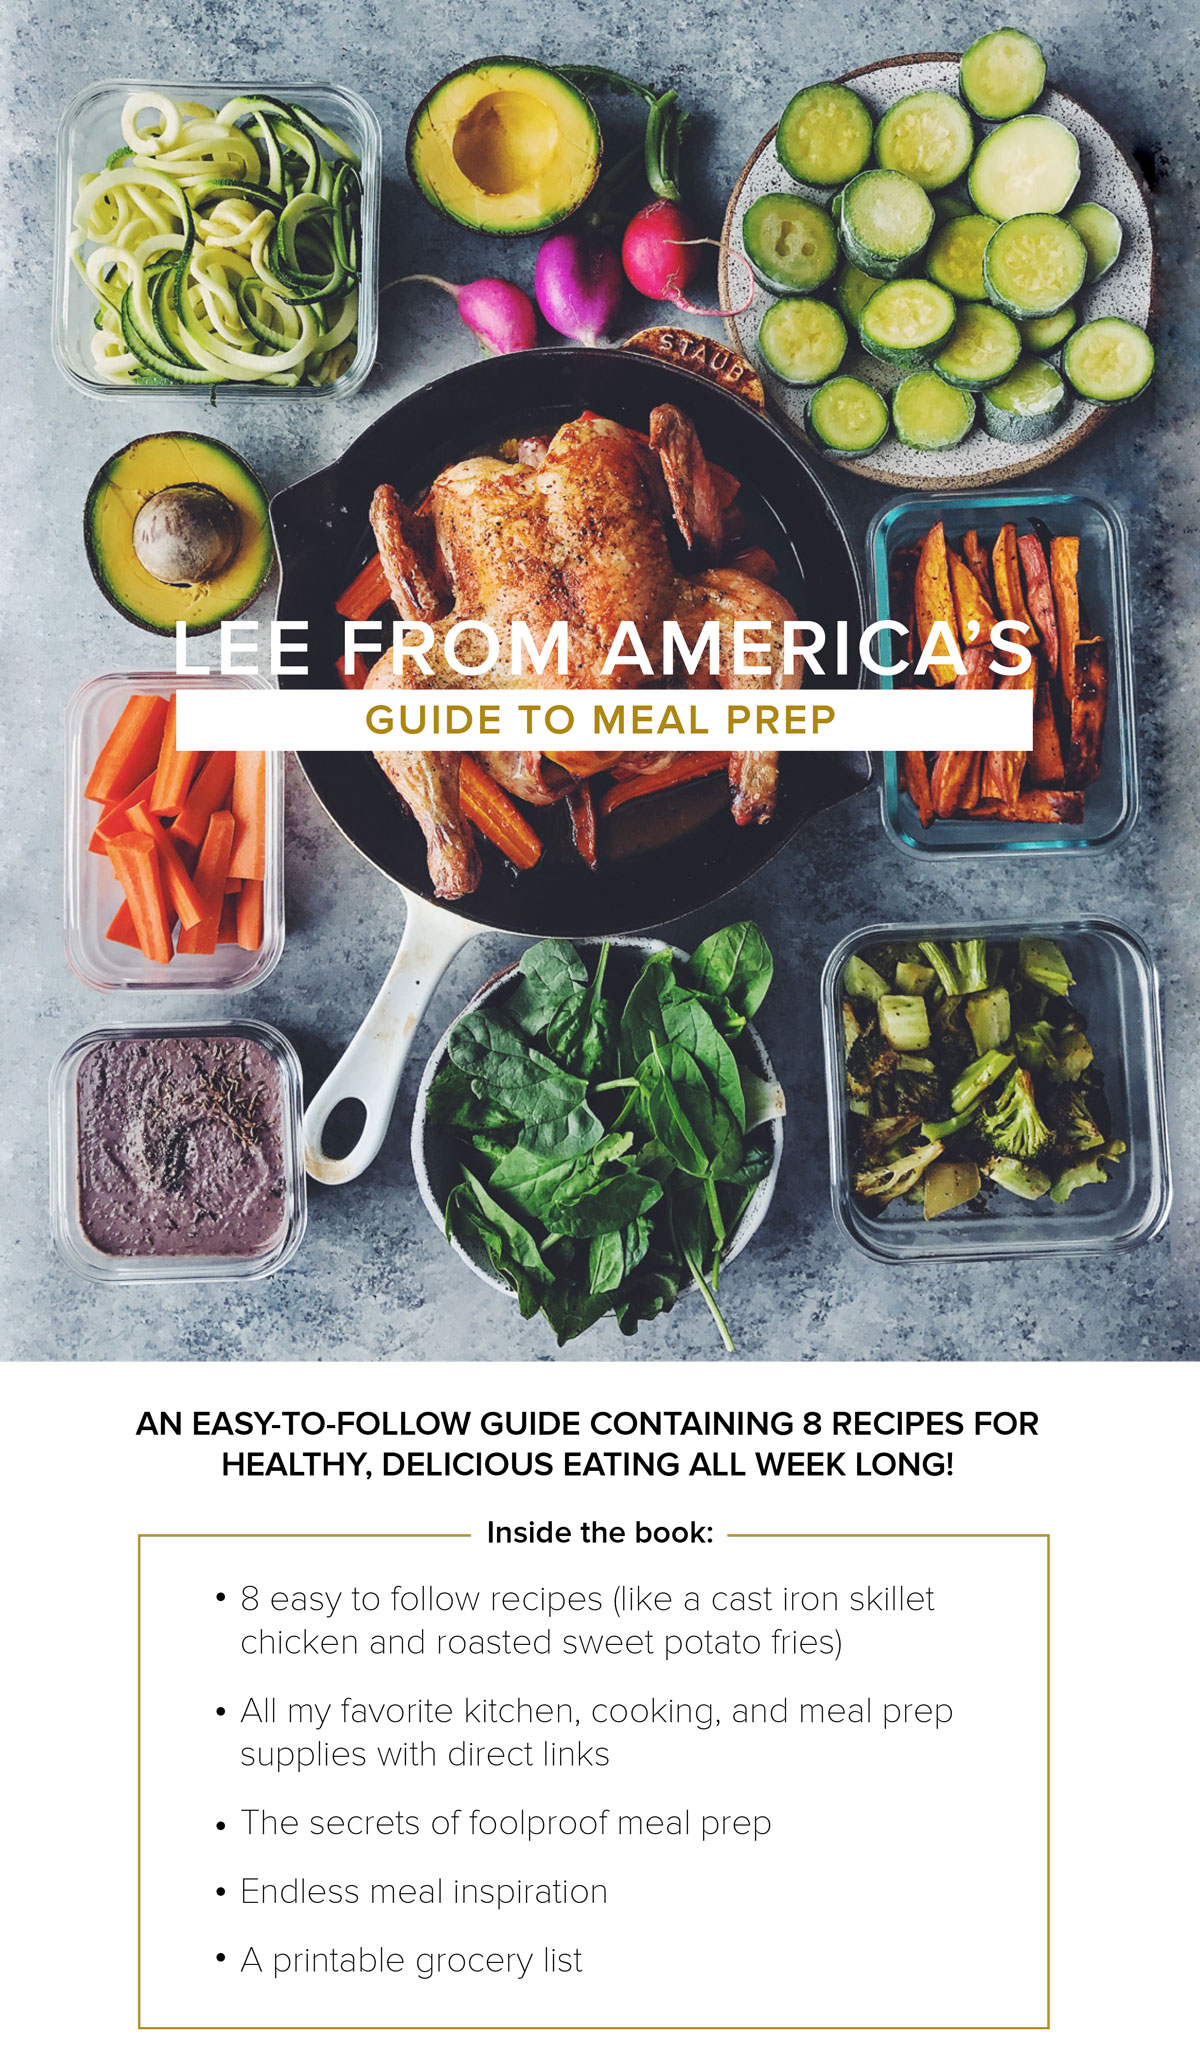 Lee From America’s Guide to Meal Prep — Lee From America